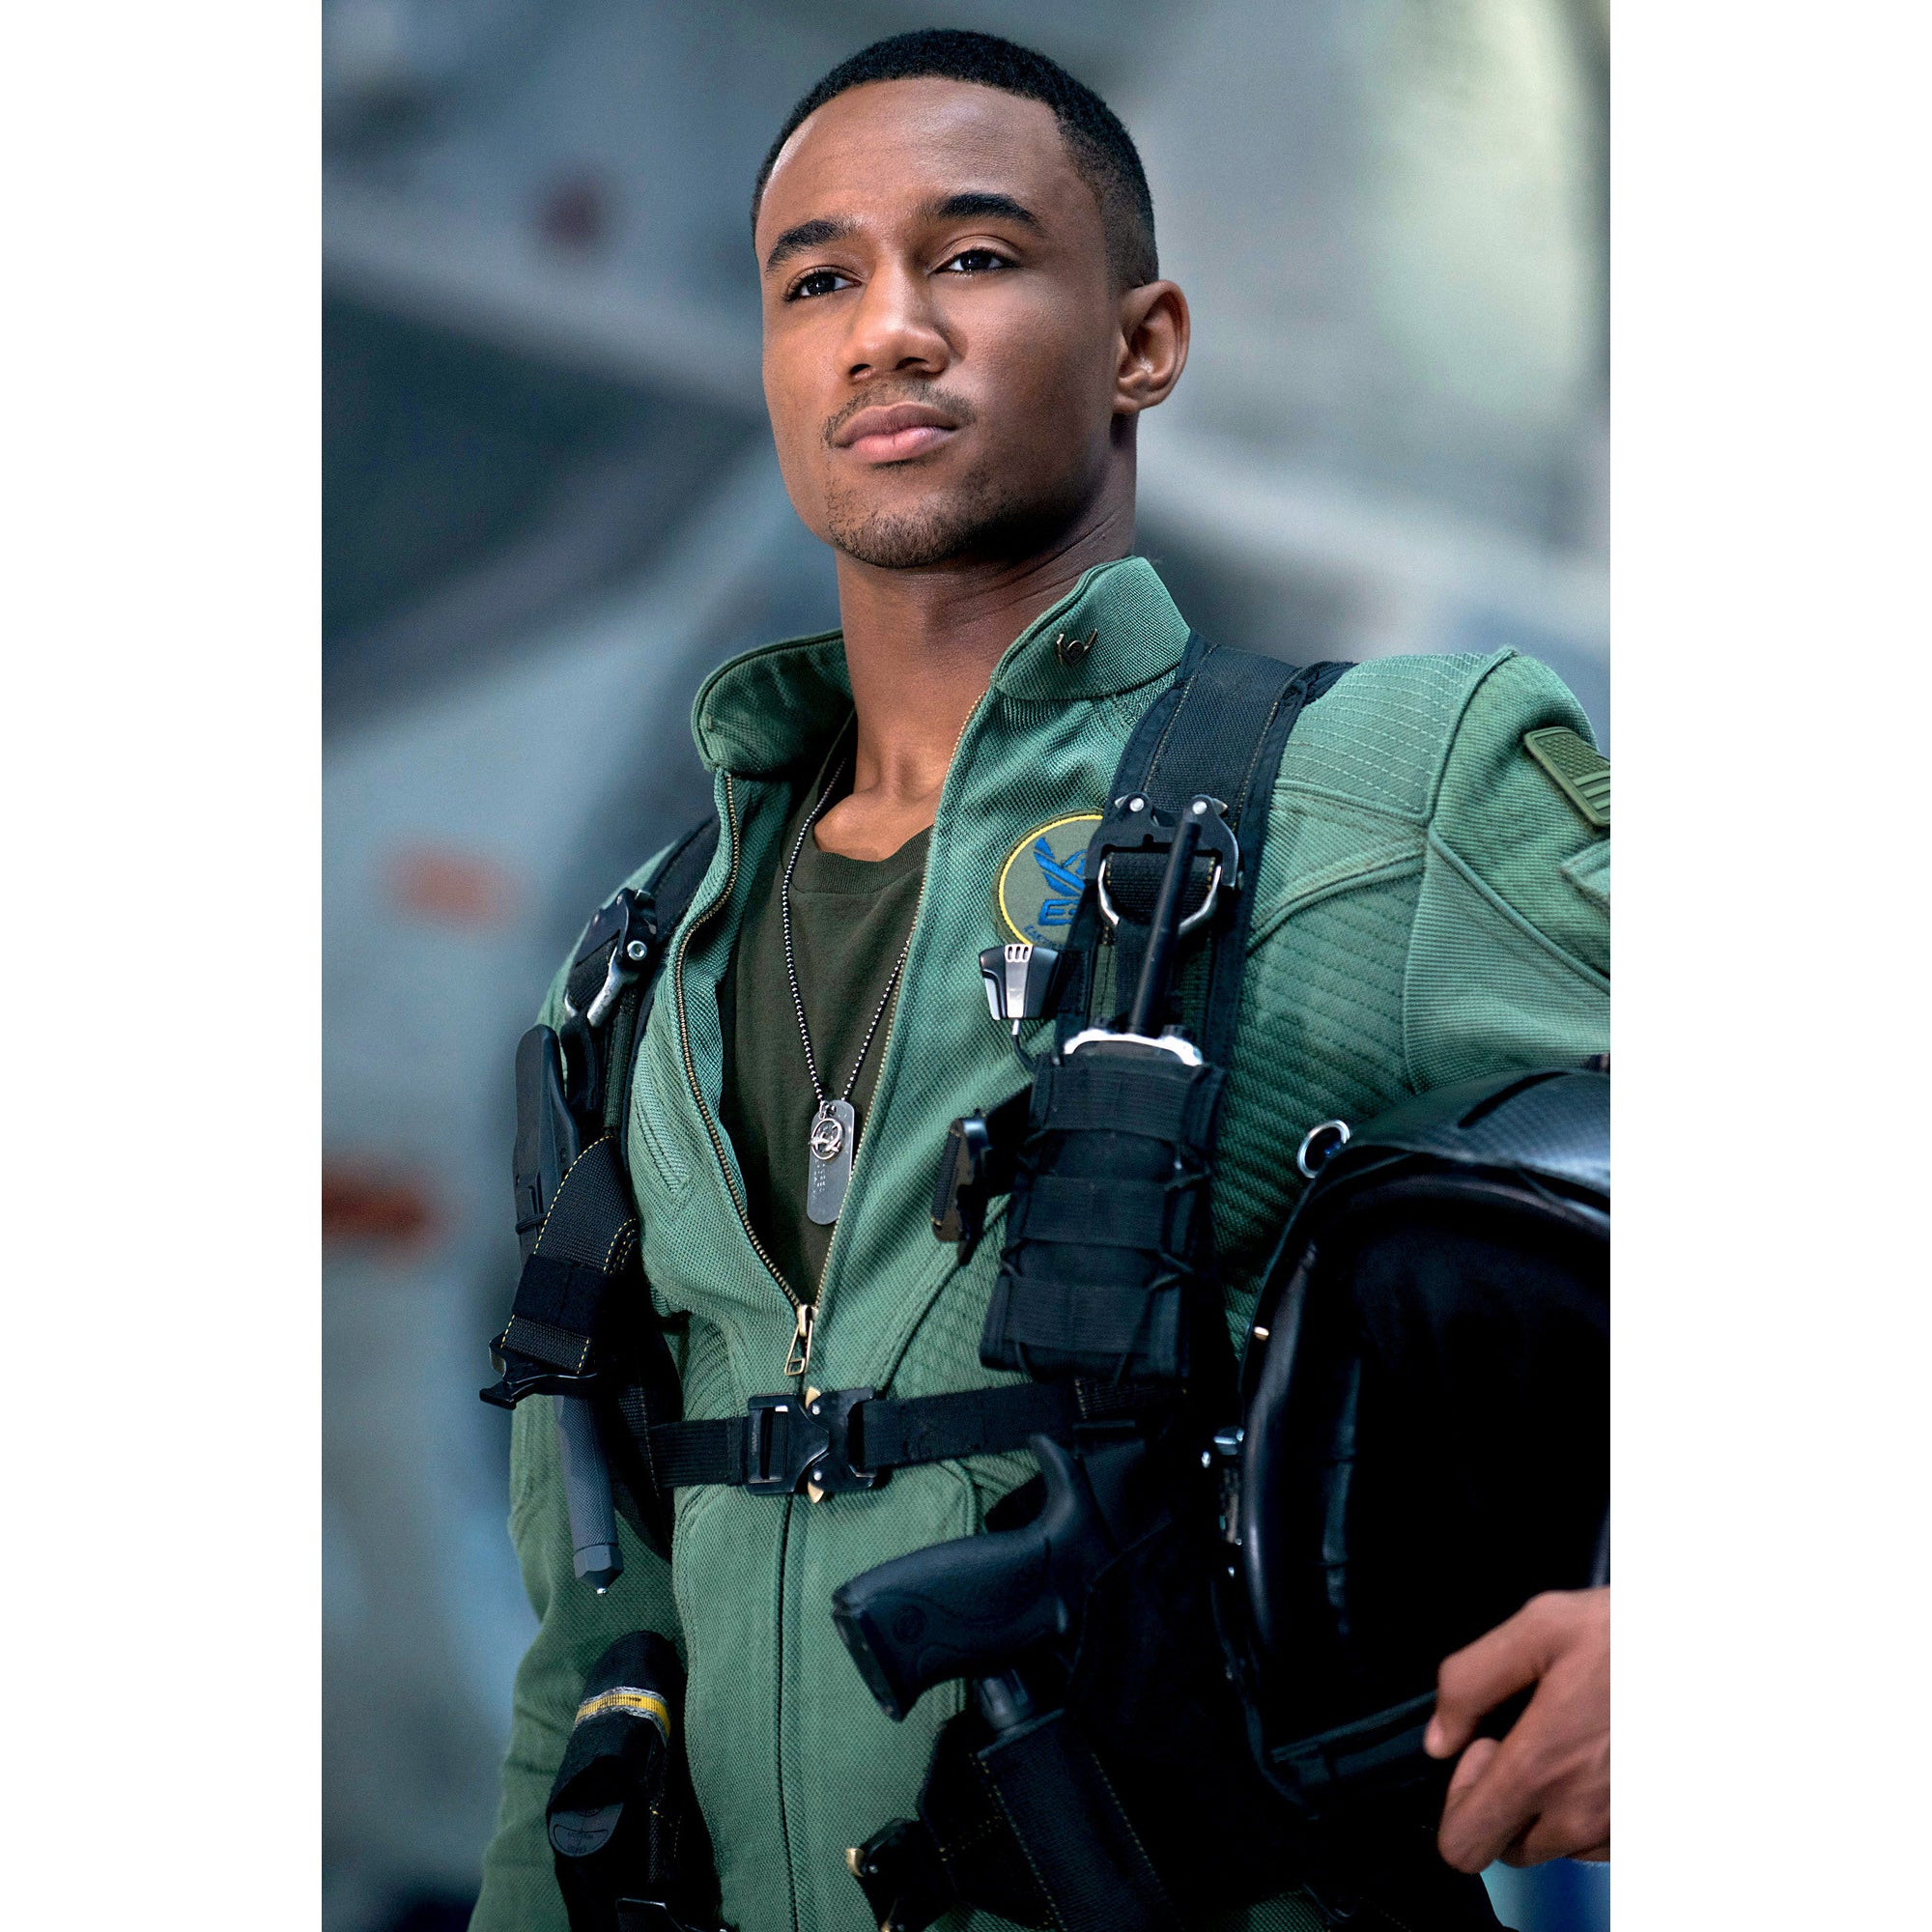 Black Sci-Fi Actors That Are Out of This World